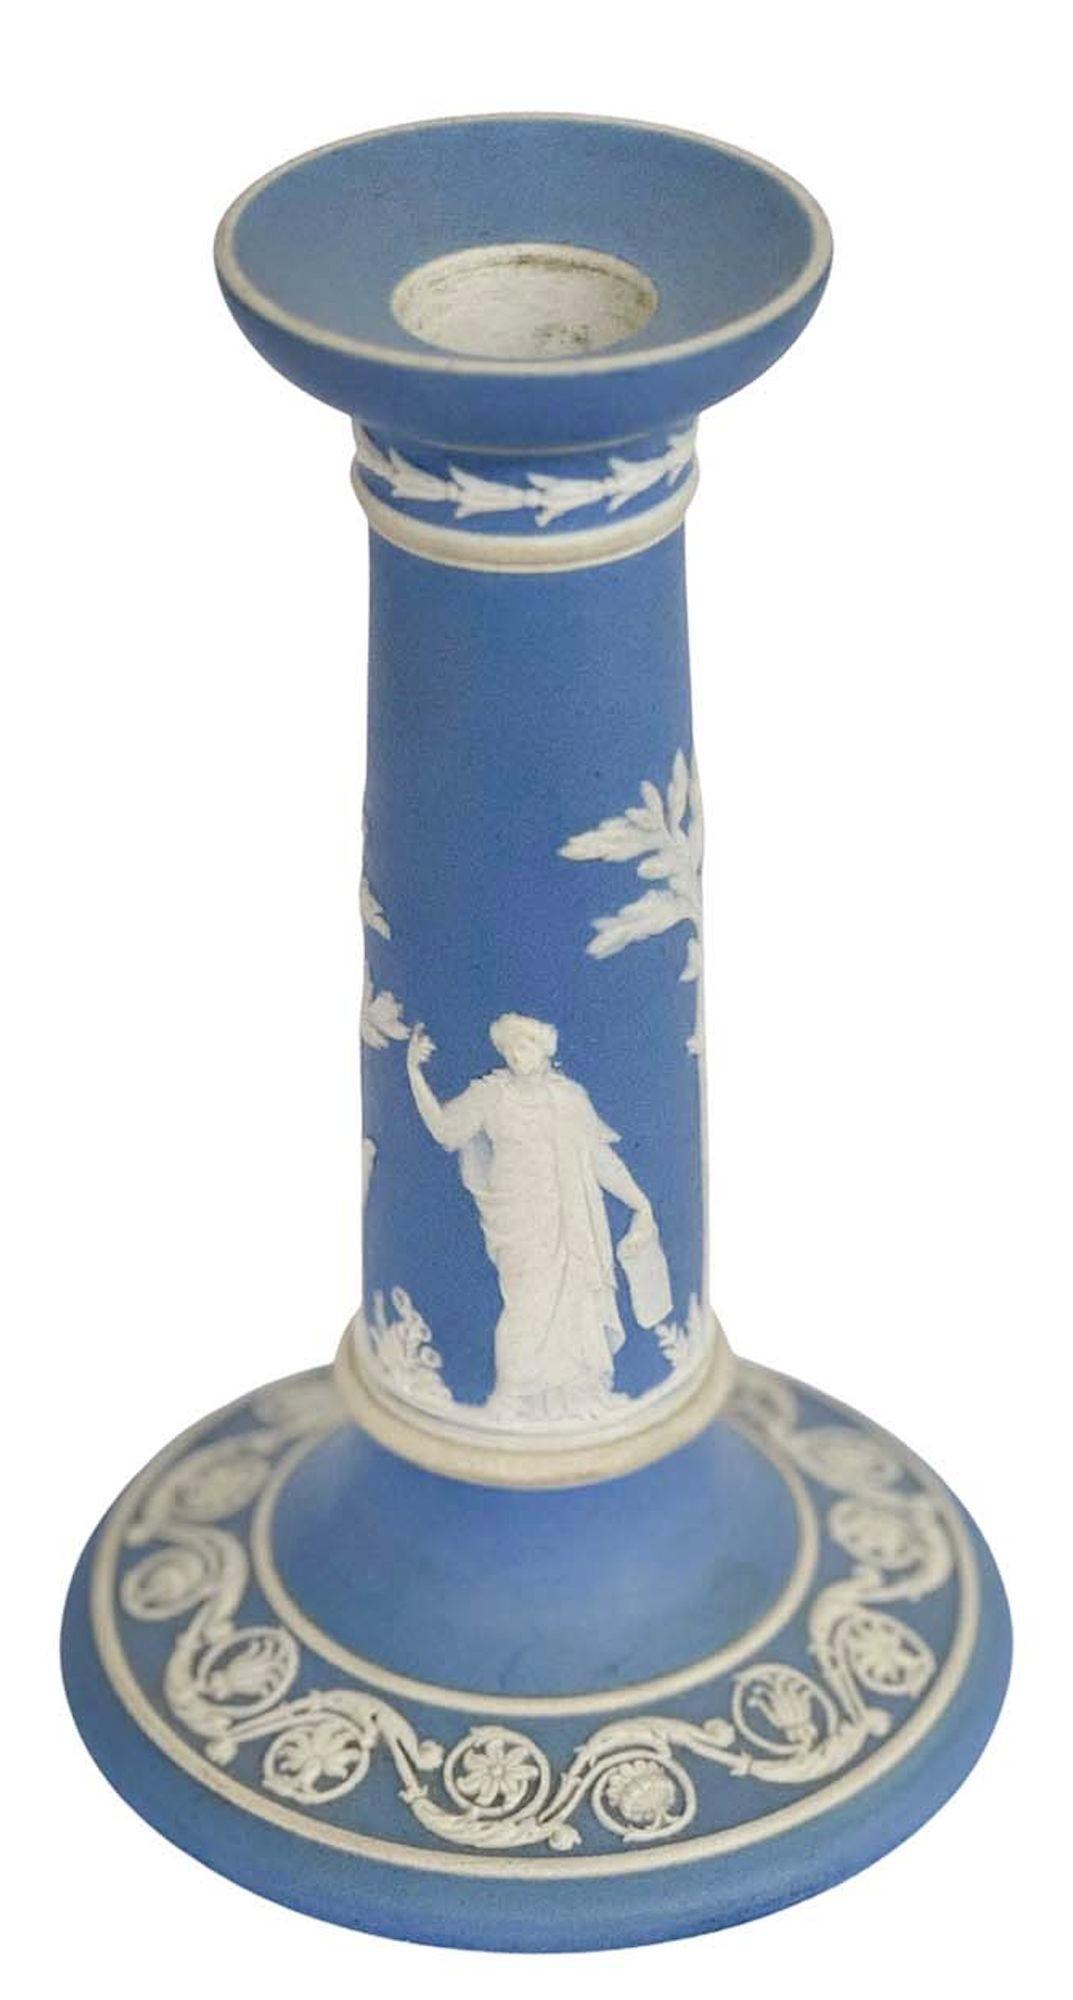 Pair of elegant light blue and white jasperware Wedgwood candlesticks with great detail all around depicting classical imagery and botanical figures. 
Made in England, c. 1920's. 
*Signed on the base 